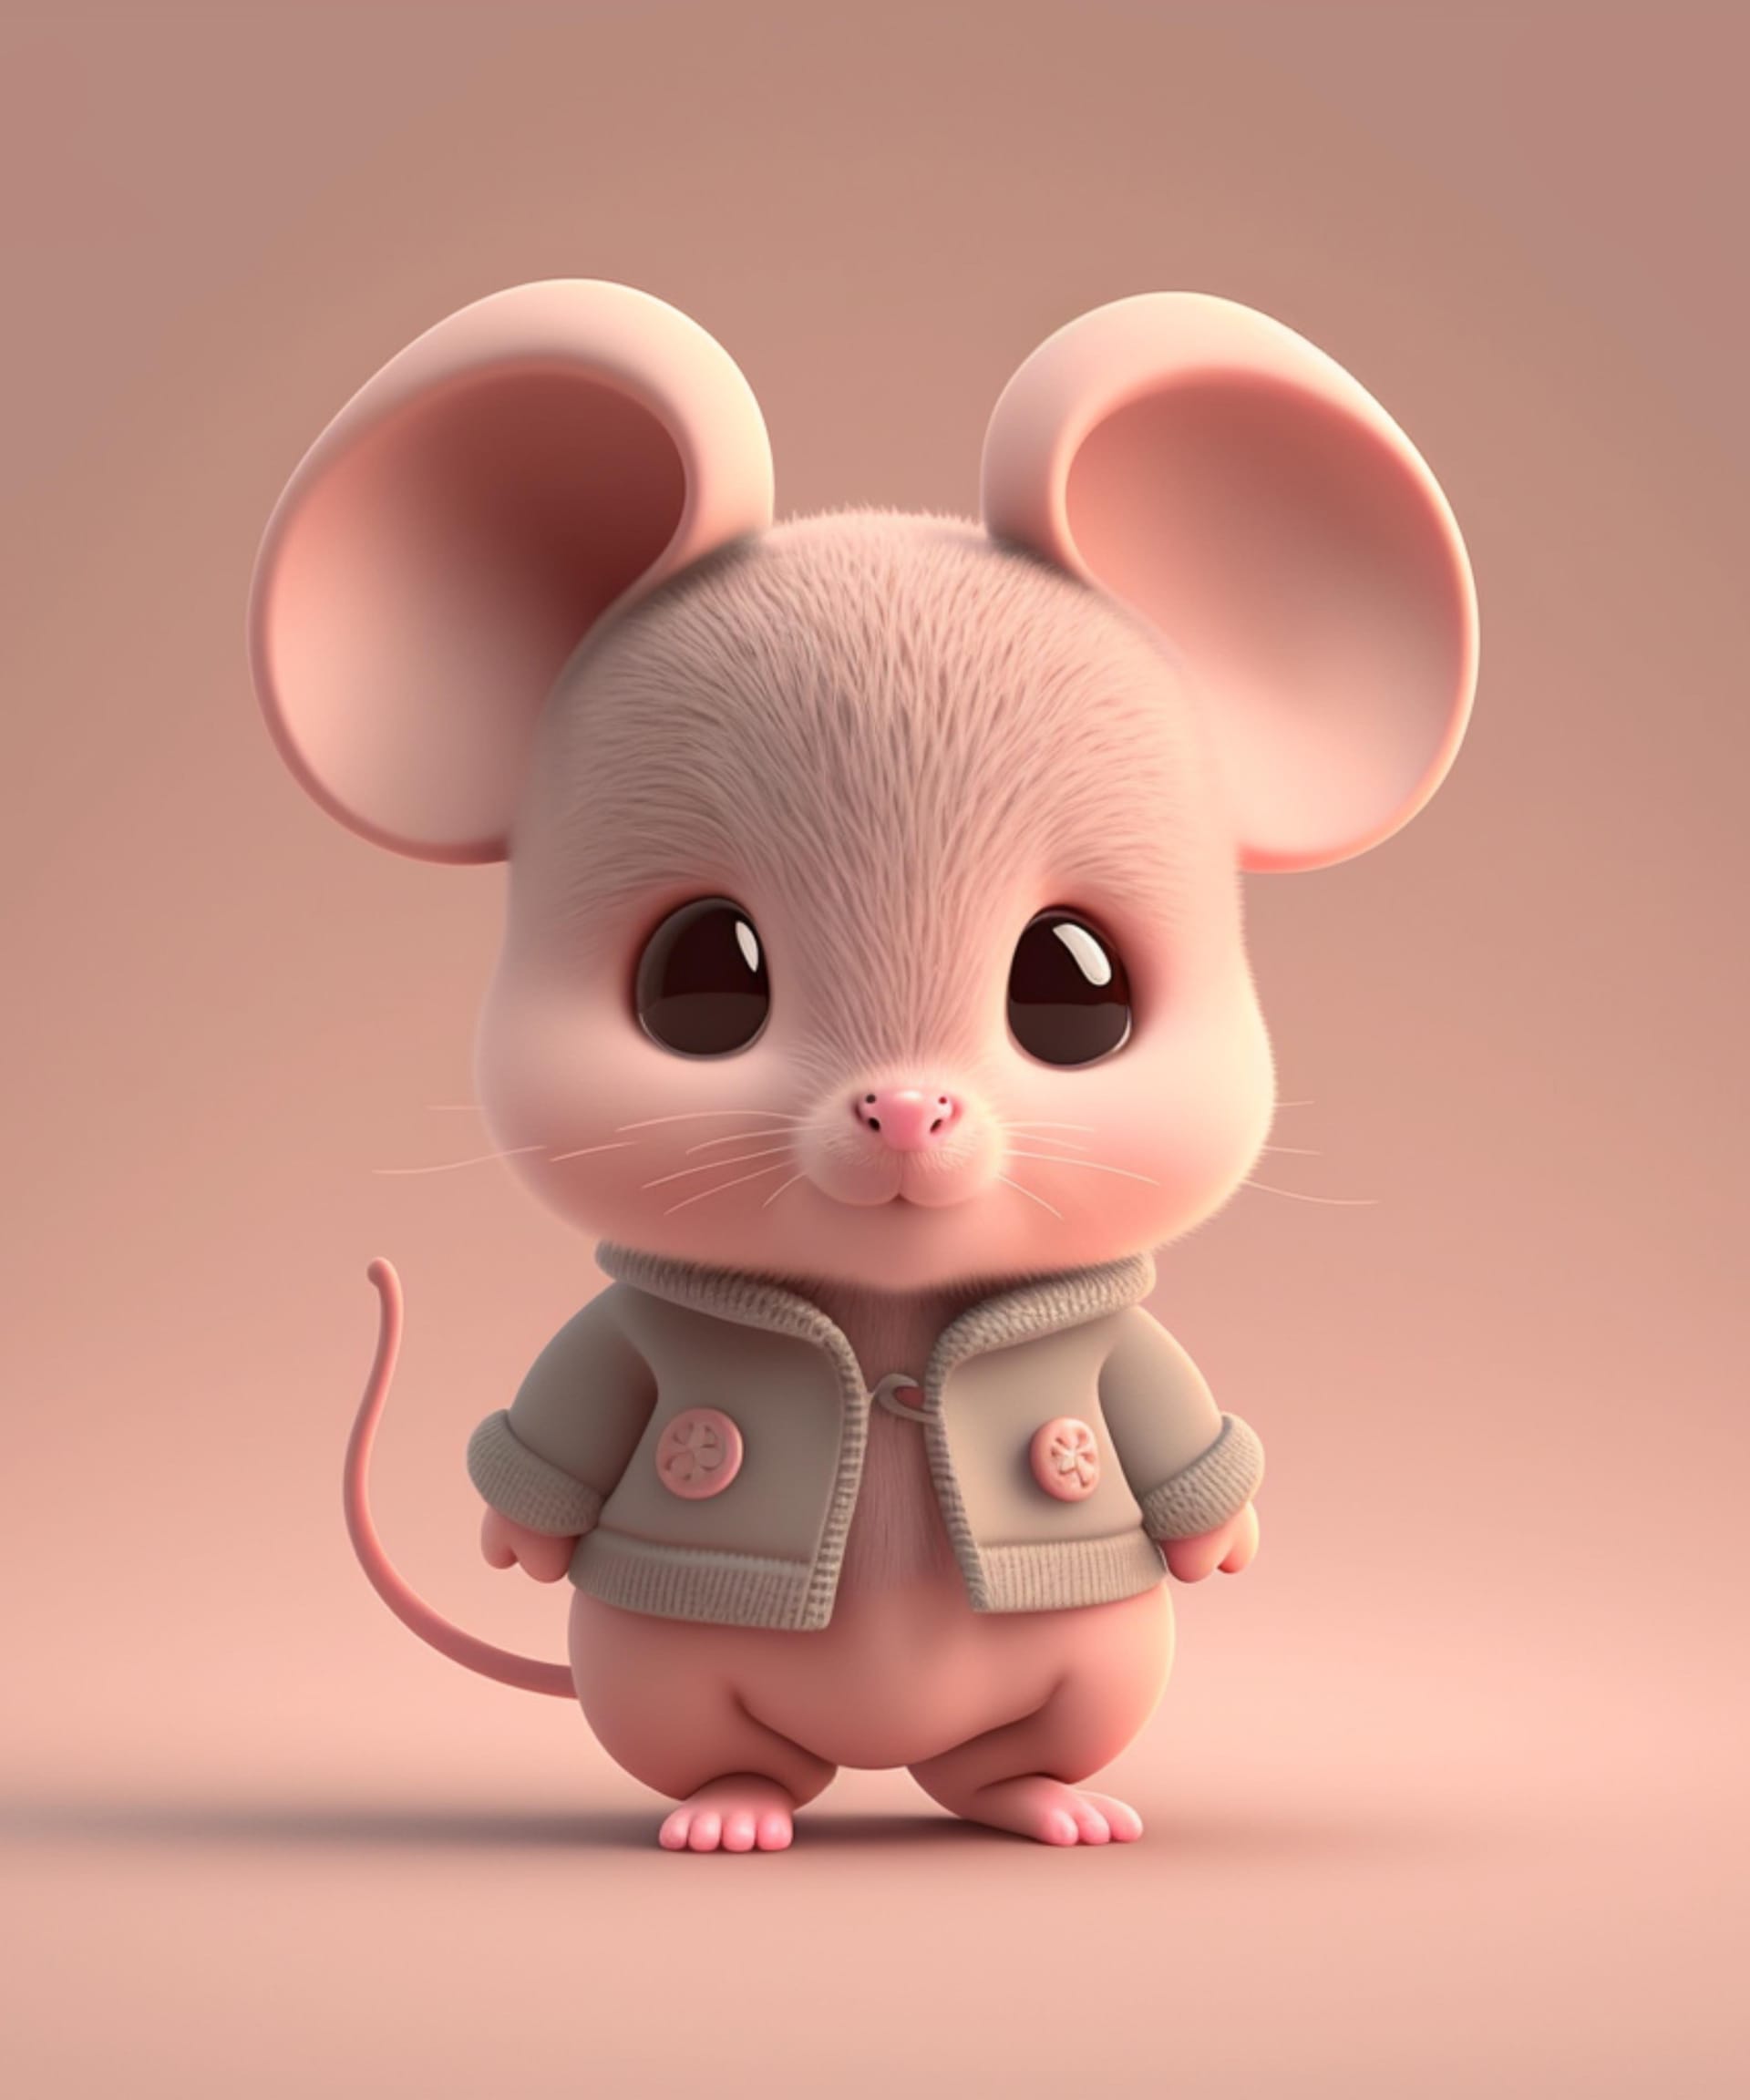 Baby mouse fine picture cute animal pictures